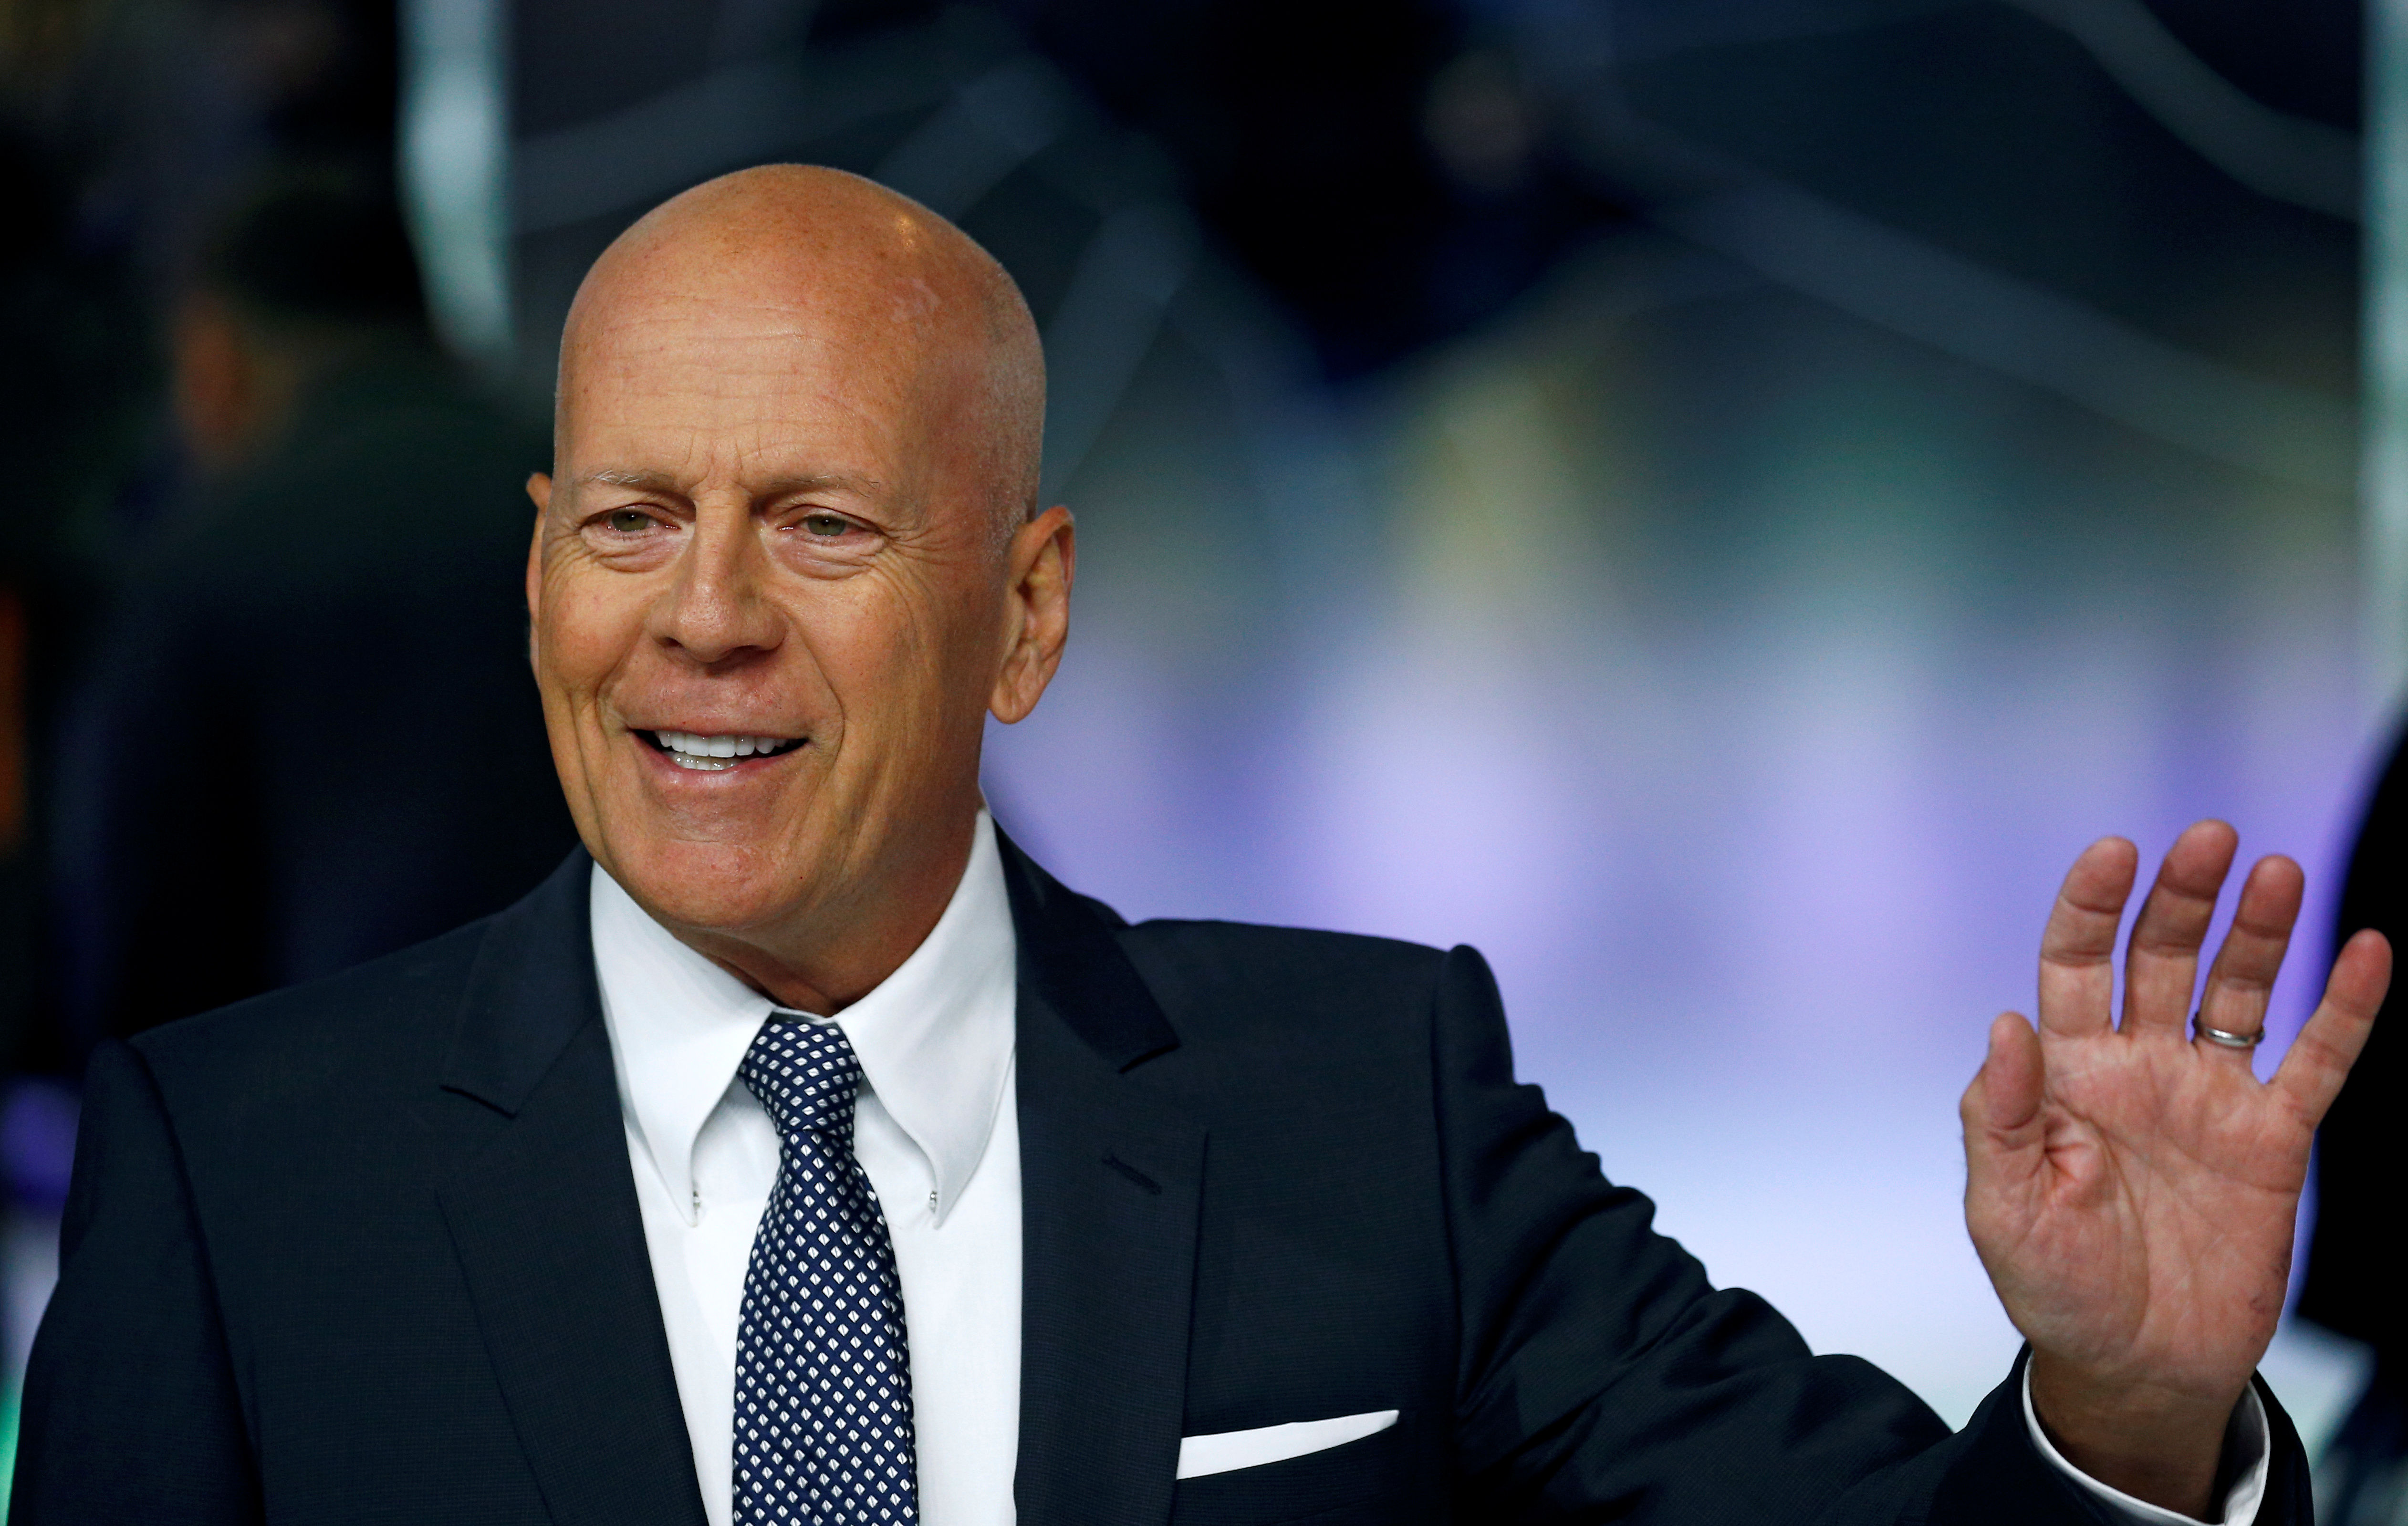 A deepfake of Bruce Willis will appear in his place for future film projects